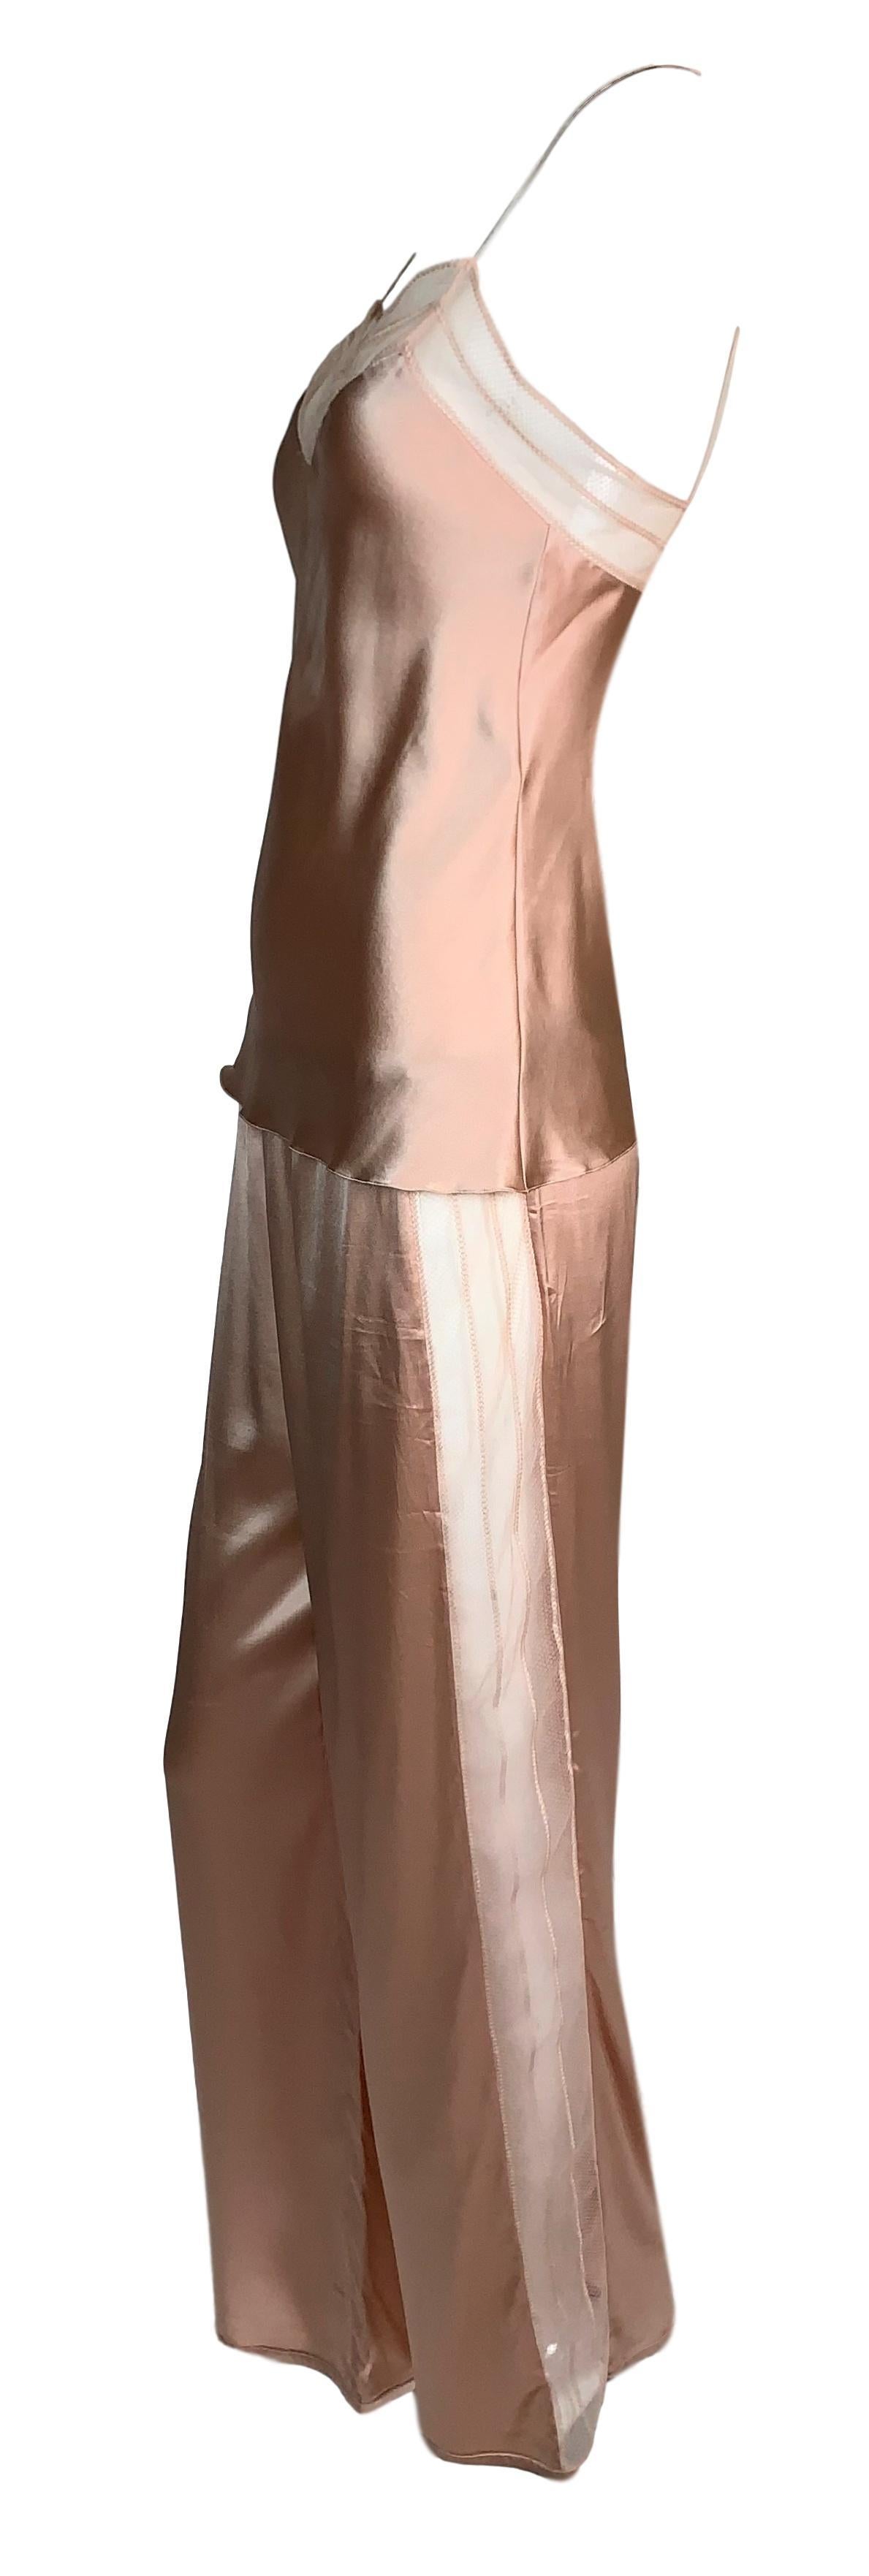 DESIGNER: 2000's Christian Dior by John Galliano

Please contact for more information and/or photos.

CONDITION: Good- faint water mark on top- please see last photo. 

FABRIC: Silk

COUNTRY MADE: France

SIZE: 36

MEASUREMENTS; provided as a